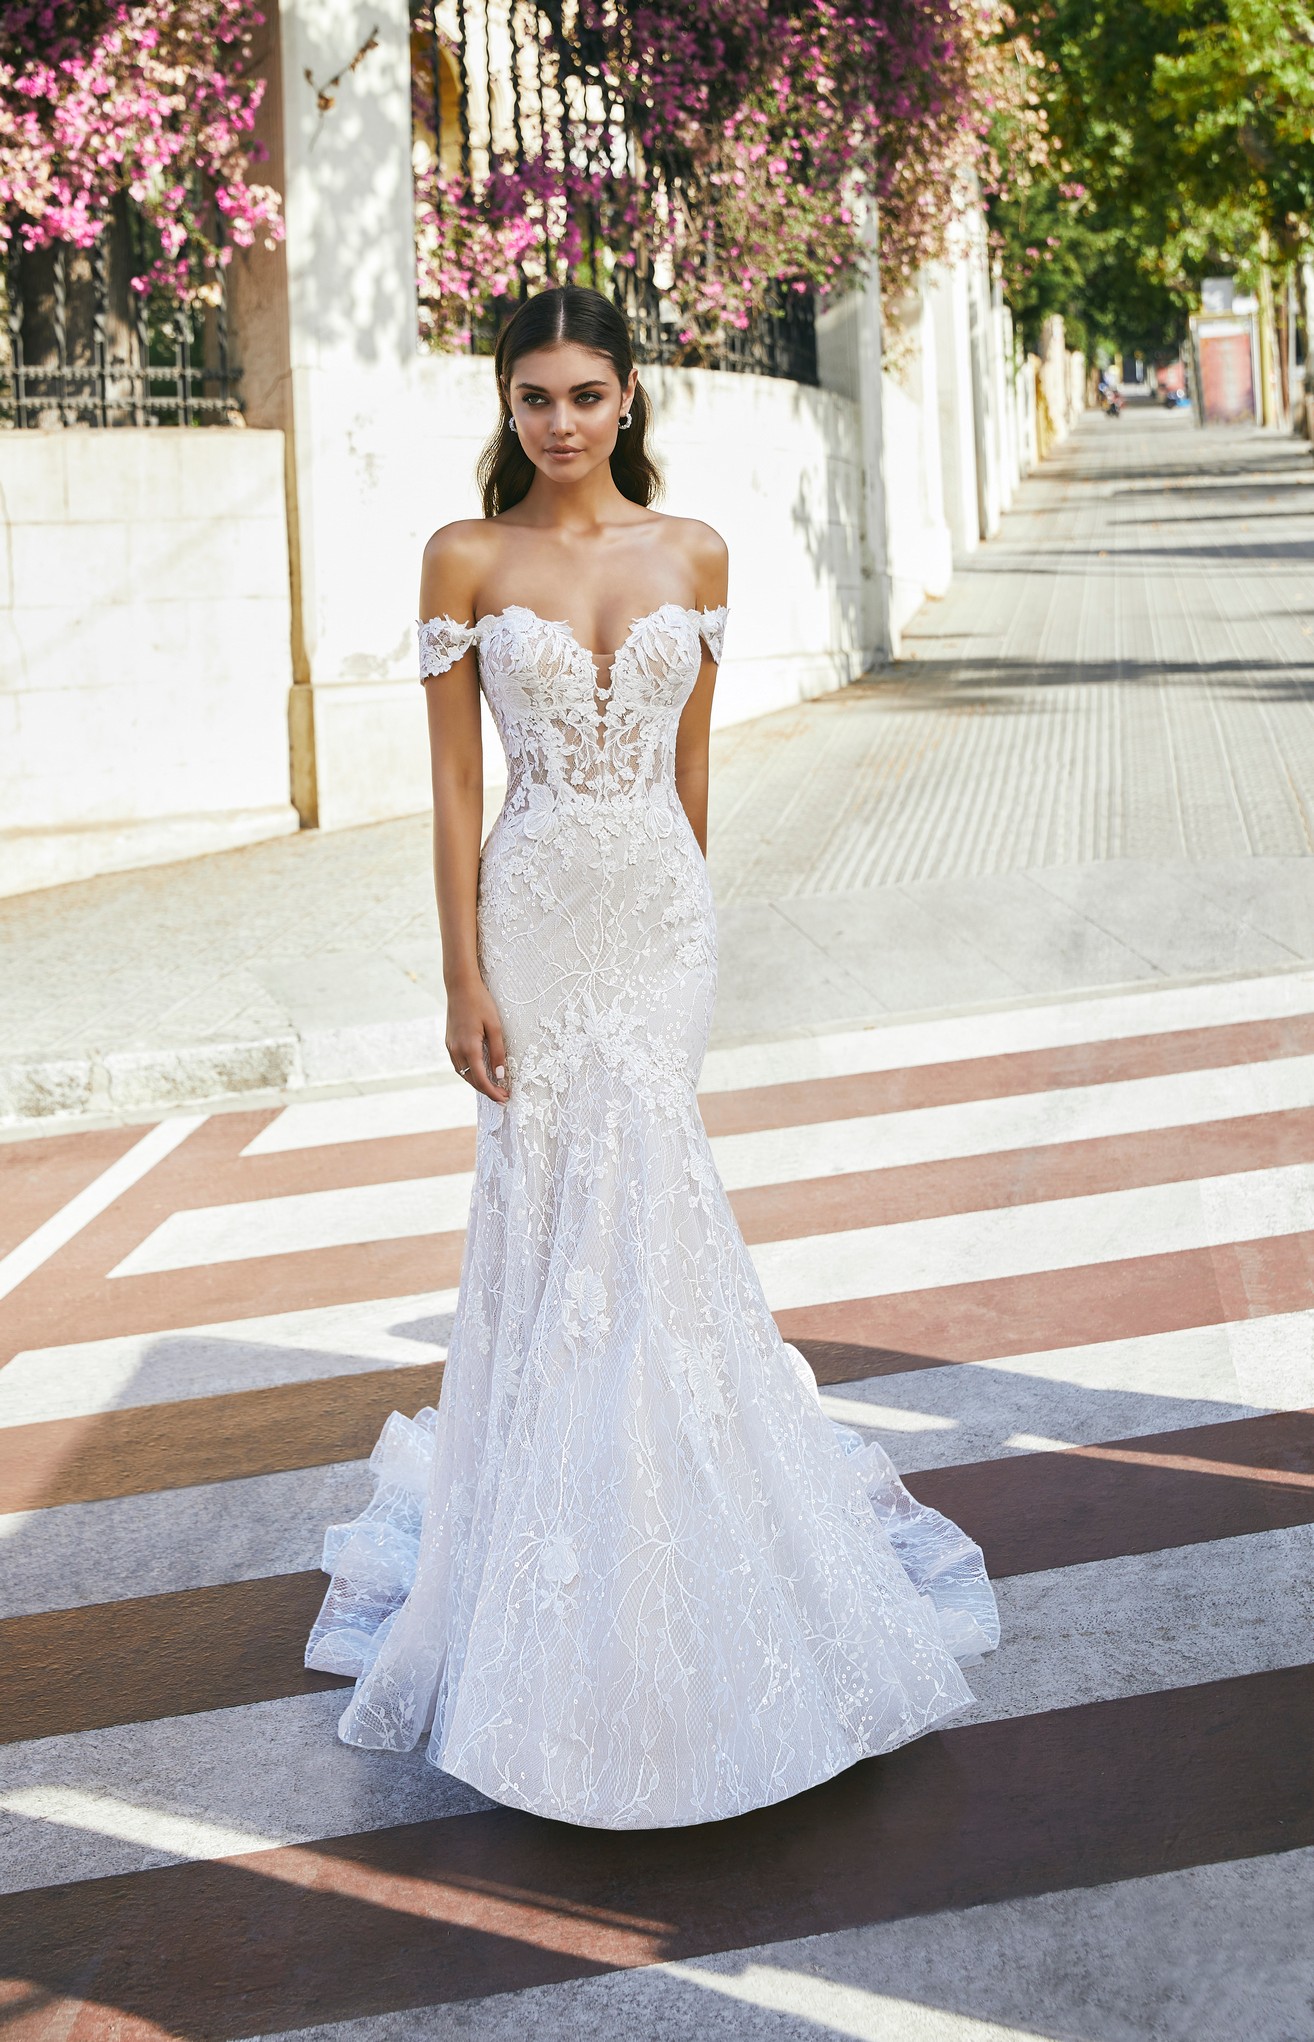 Model stood in a street wearing Ronald Joyce style 69707, a strapless lace fit and flare wedding dress with a plunging sweetheart neckline, illusion bodice and detachable off-the-shoulder short sleeves 